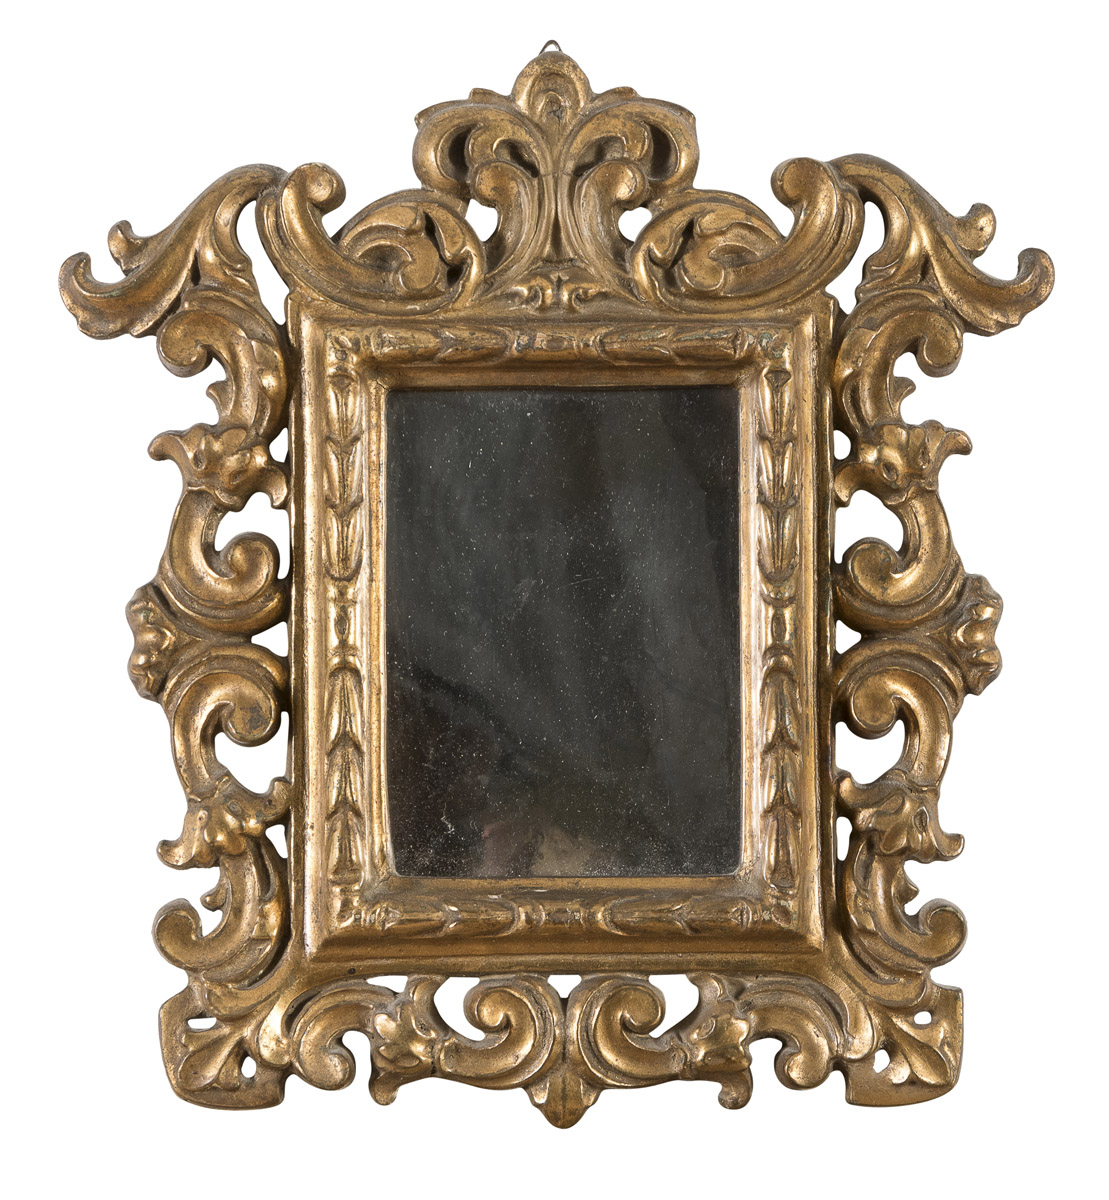 PAIR OF GILTWOOD MIRRORS TUSCANY END OF THE 18TH CENTURY - Image 2 of 2